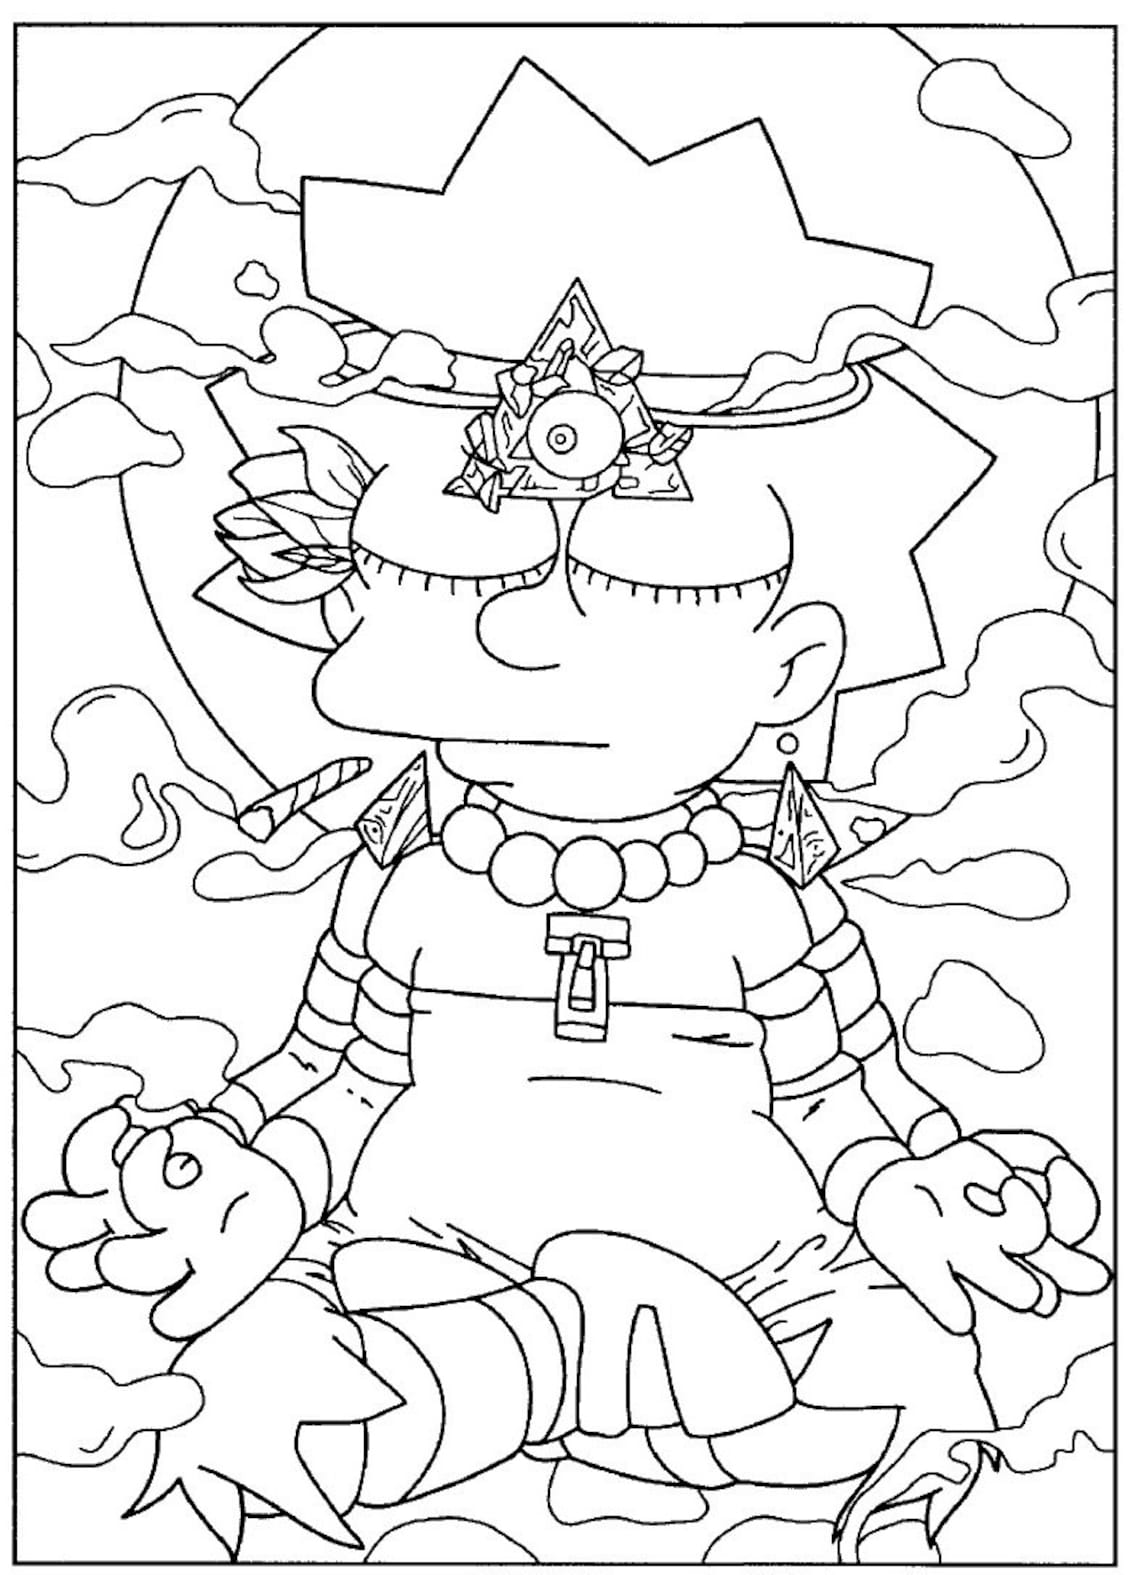 Cartoon Stoner Coloring Pages